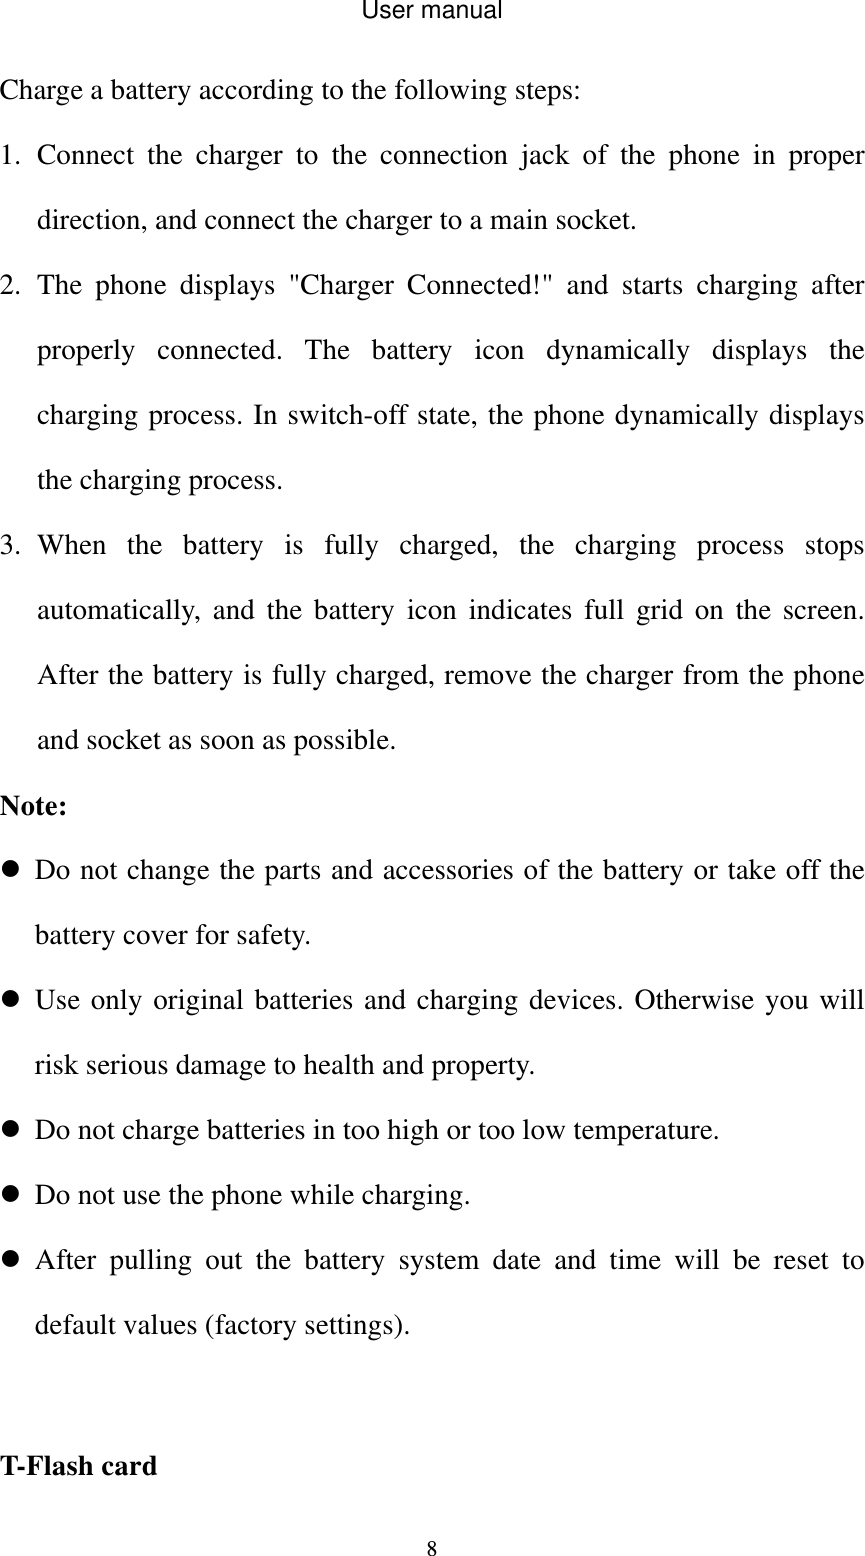 User manual  8Charge a battery according to the following steps: 1. Connect the charger to the connection jack of the phone in proper direction, and connect the charger to a main socket. 2. The phone displays &quot;Charger Connected!&quot; and starts charging after properly connected. The battery icon dynamically displays the charging process. In switch-off state, the phone dynamically displays the charging process. 3. When the battery is fully charged, the charging process stops automatically, and the battery icon indicates full grid on the screen. After the battery is fully charged, remove the charger from the phone and socket as soon as possible. Note:  Do not change the parts and accessories of the battery or take off the battery cover for safety.  Use only original batteries and charging devices. Otherwise you will risk serious damage to health and property.  Do not charge batteries in too high or too low temperature.  Do not use the phone while charging.  After pulling out the battery system date and time will be reset to default values (factory settings).  T-Flash card 